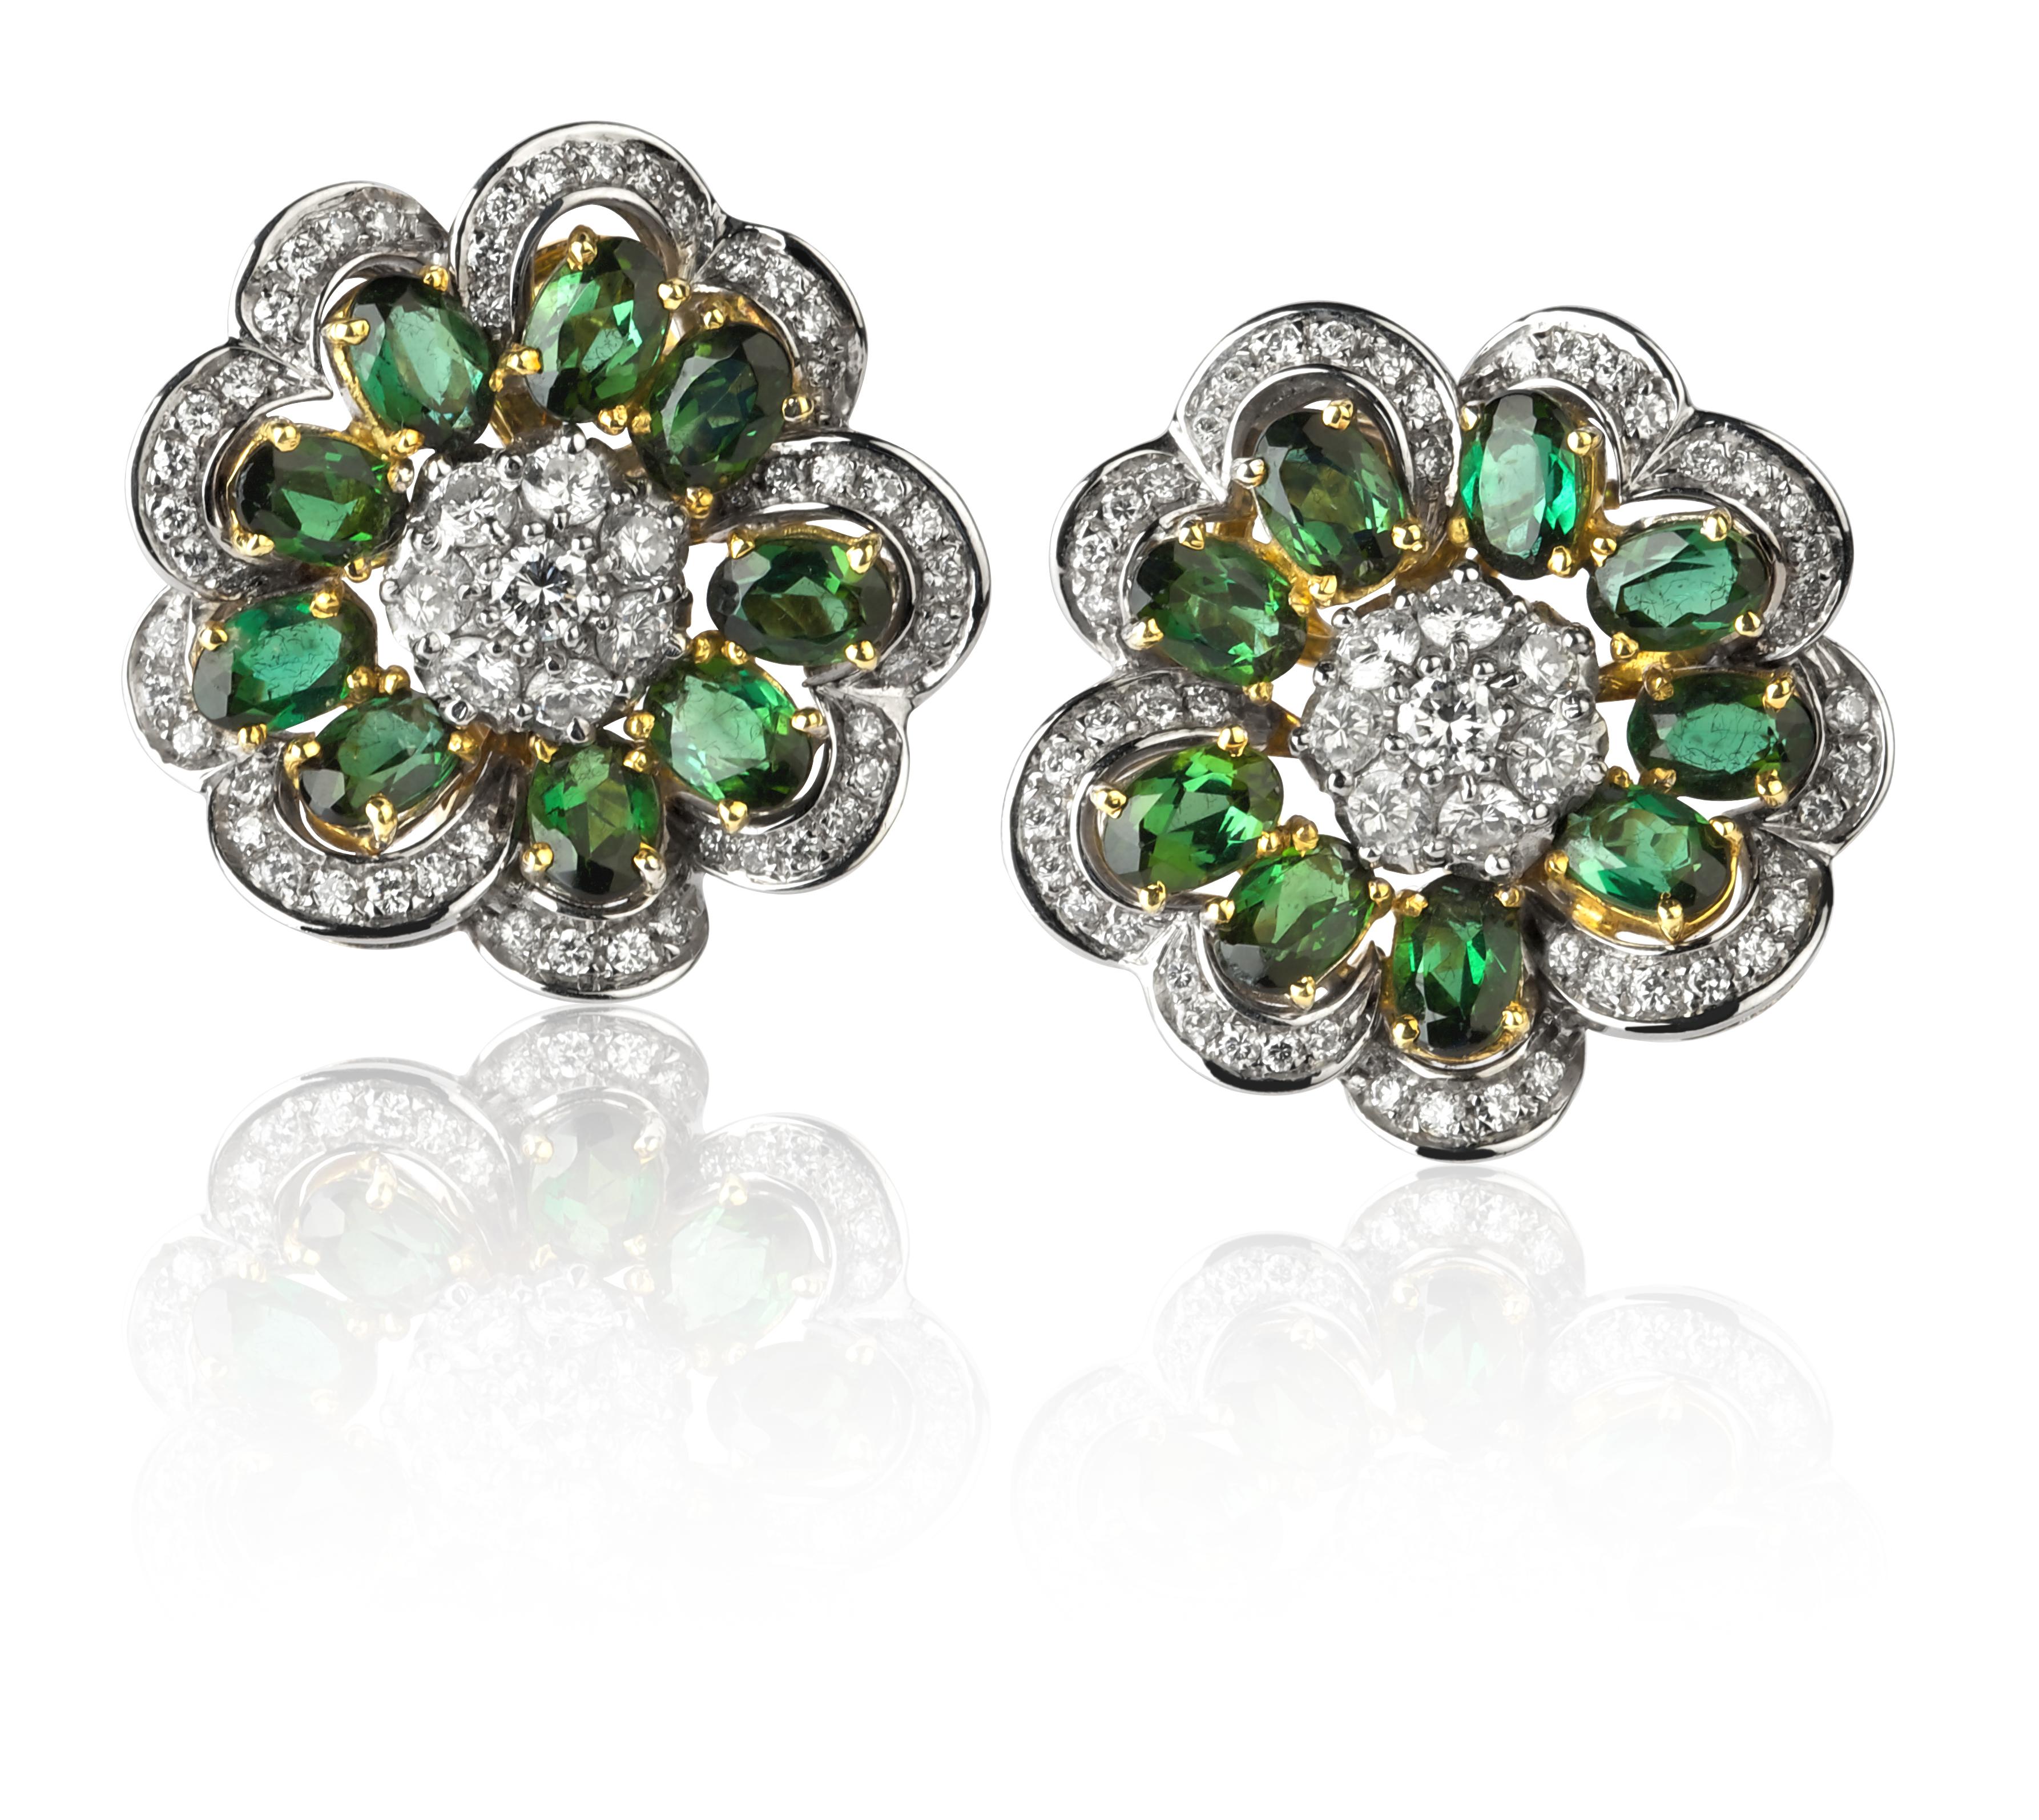 Classical Roman Vintage Earrings from ANGELETTI PRIVATE COLLECTION Gold Green Tourmaline Diamond For Sale